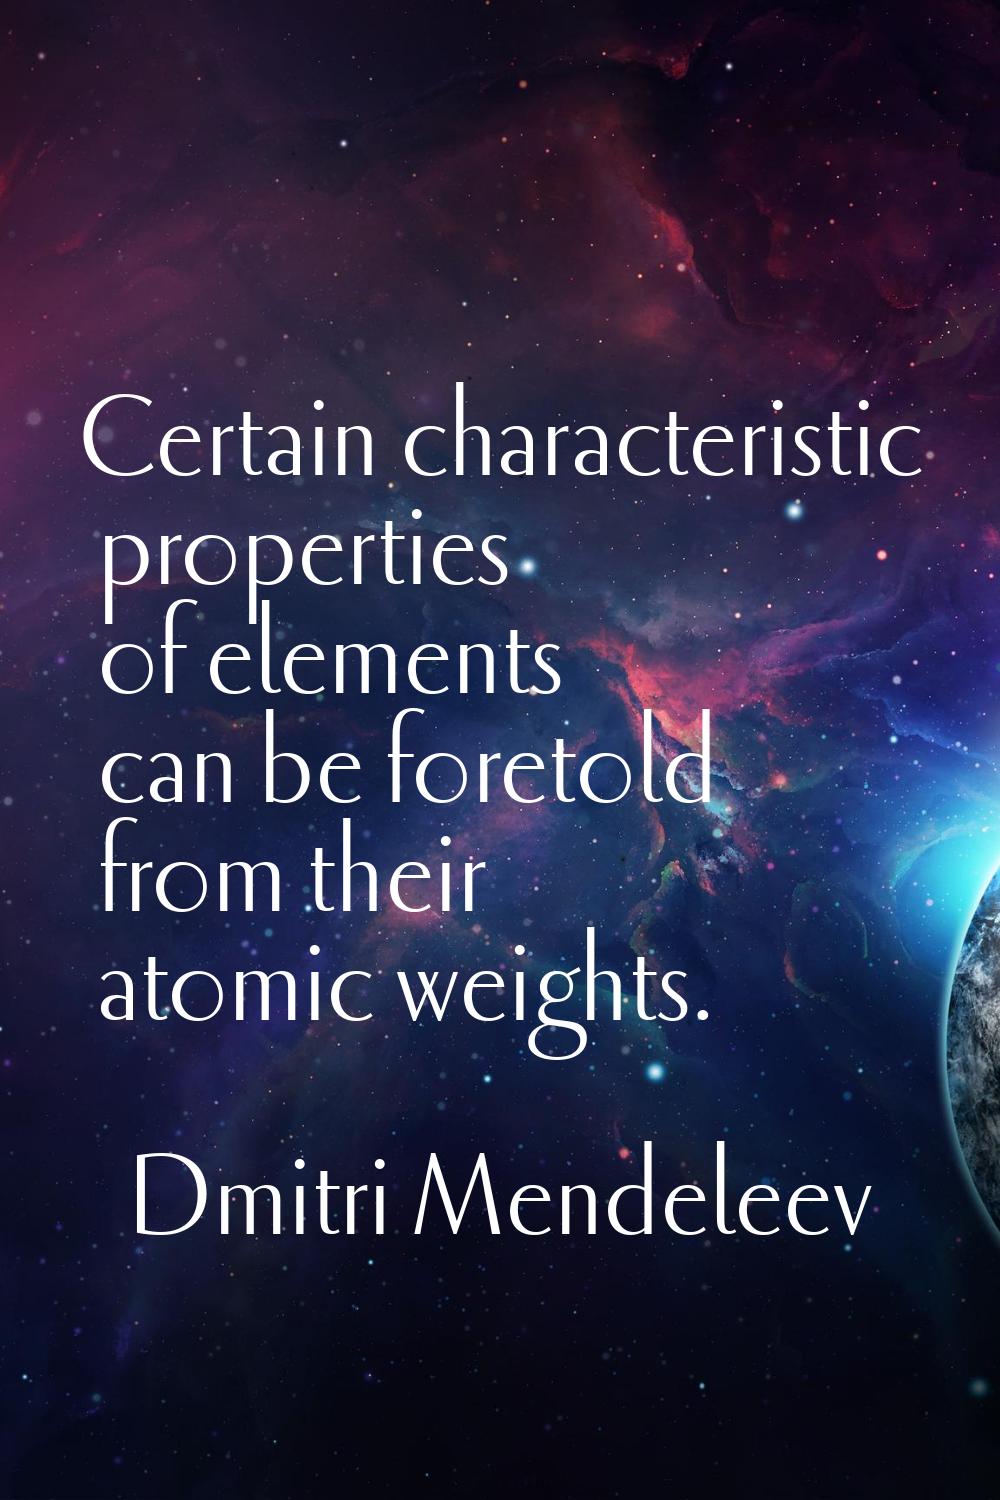 Certain characteristic properties of elements can be foretold from their atomic weights.